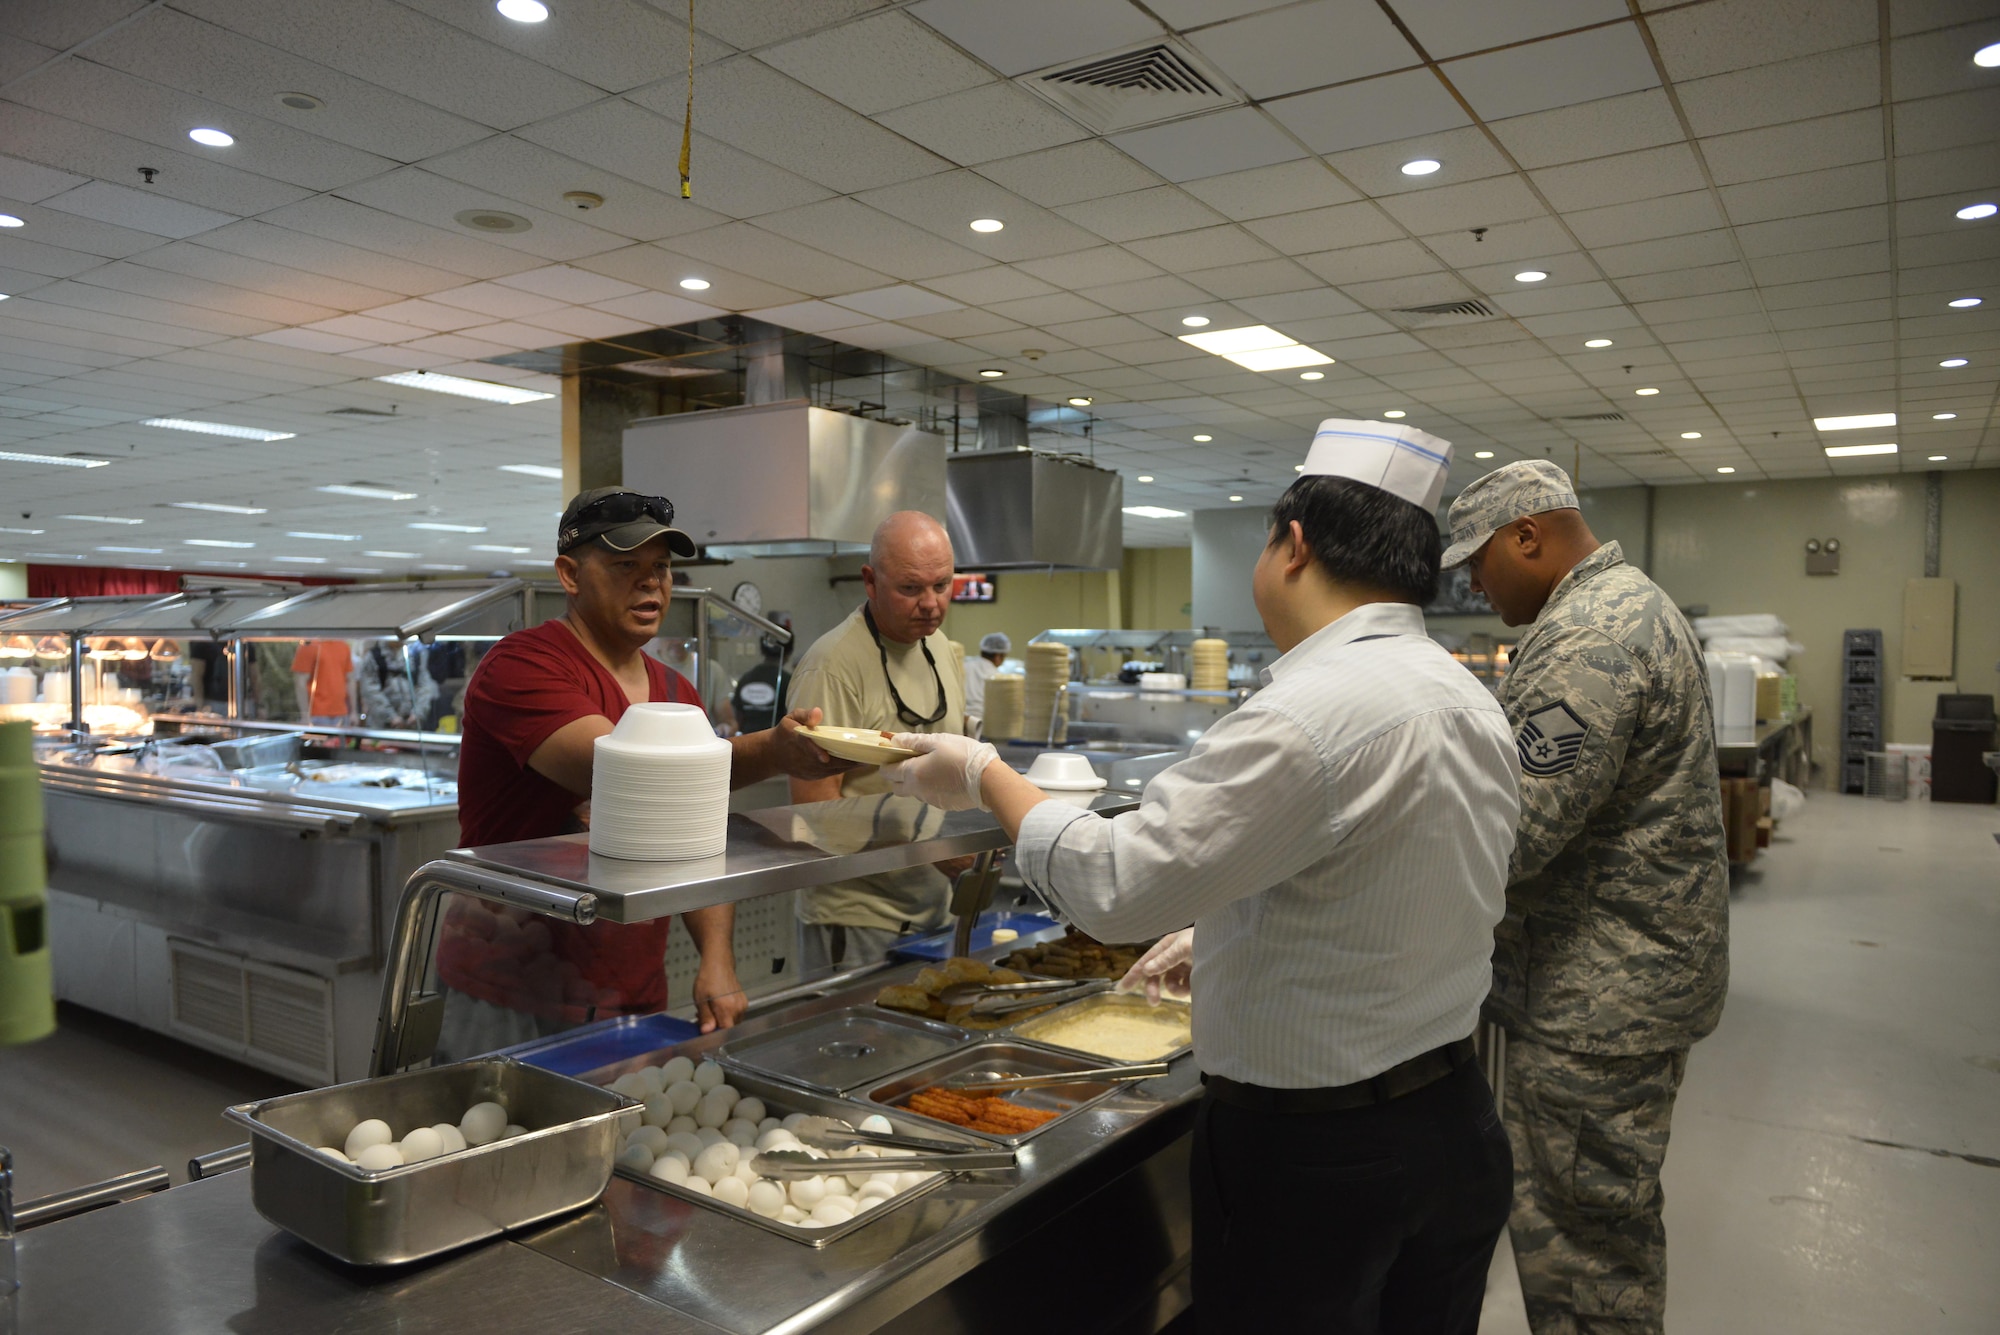 Deployed members are served breakfast by dining facility cooks and MSgt Herman Brown, 379 Expeditionary Force Support Squadron  at the Independence Dining Facility at Al Udeid Air Base, Qatar July 21, 2015. (U.S. Air Force photo/Staff Sgt. Alexandre Montes)